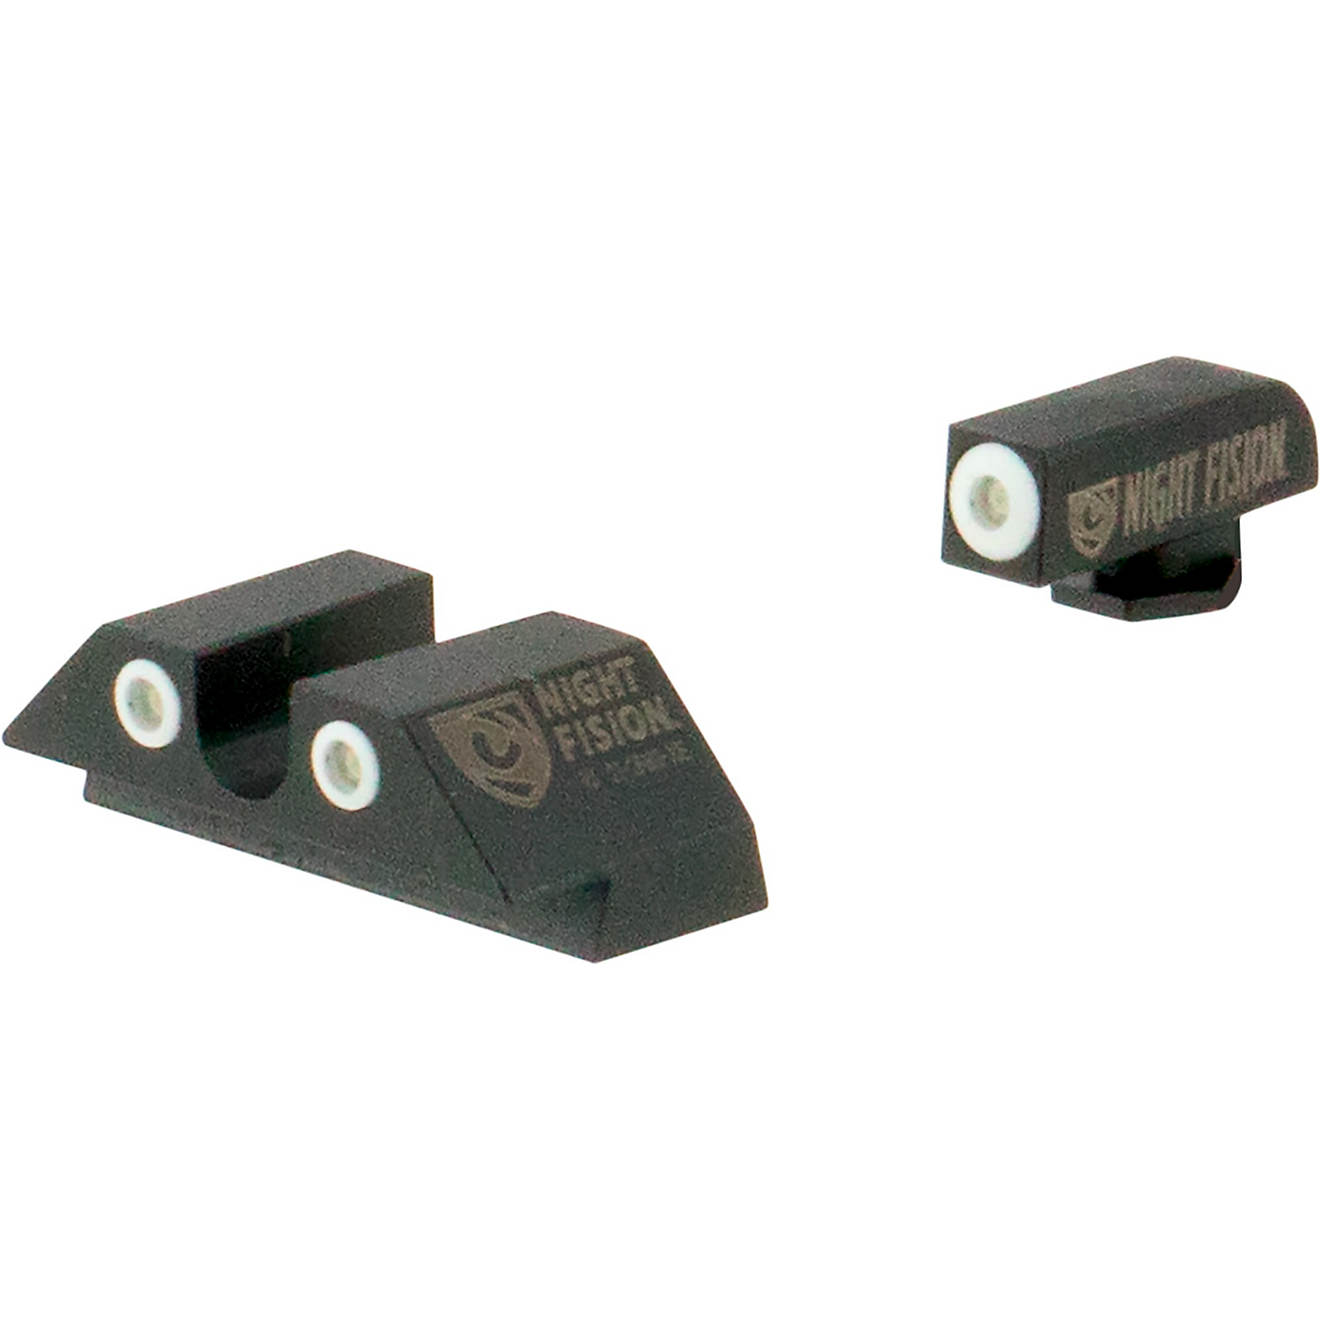 Night Fision Square Front/U-Notch Rear Night Sight                                                                               - view number 1